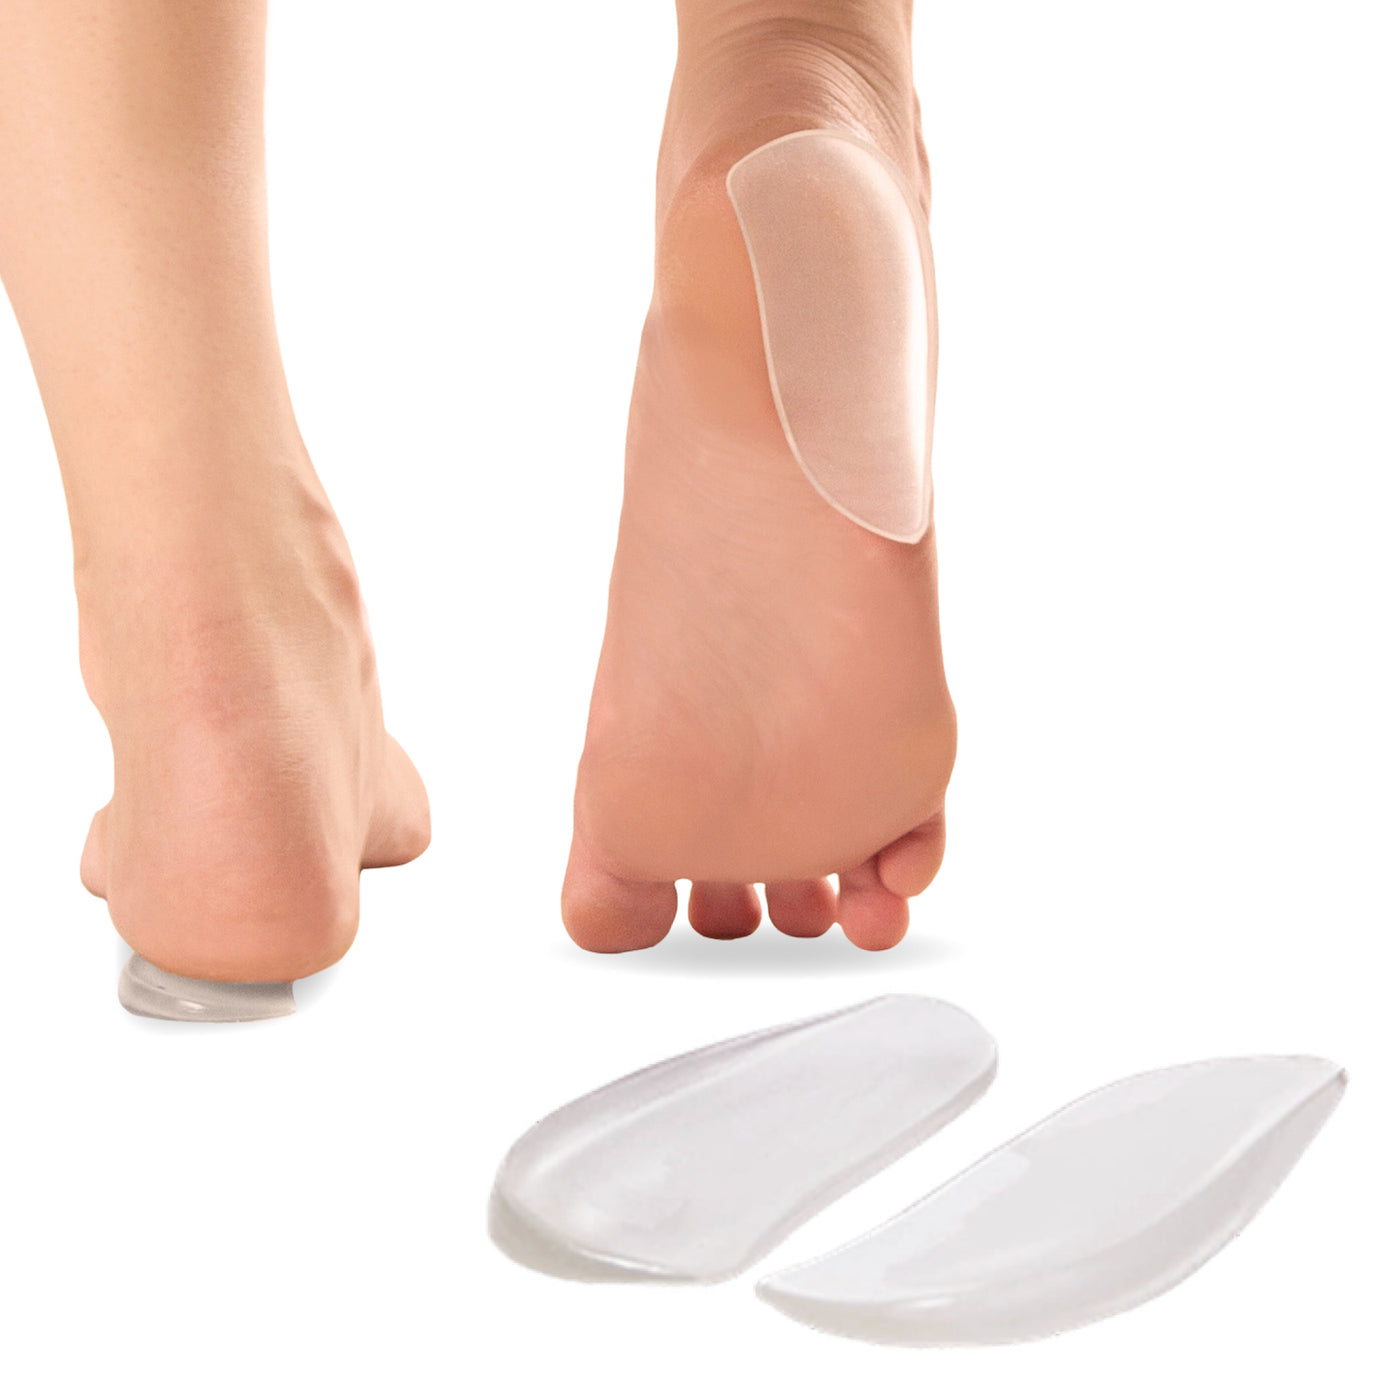 medial and lateral silicone shoe inserts prevent knock knees and bow leggedness